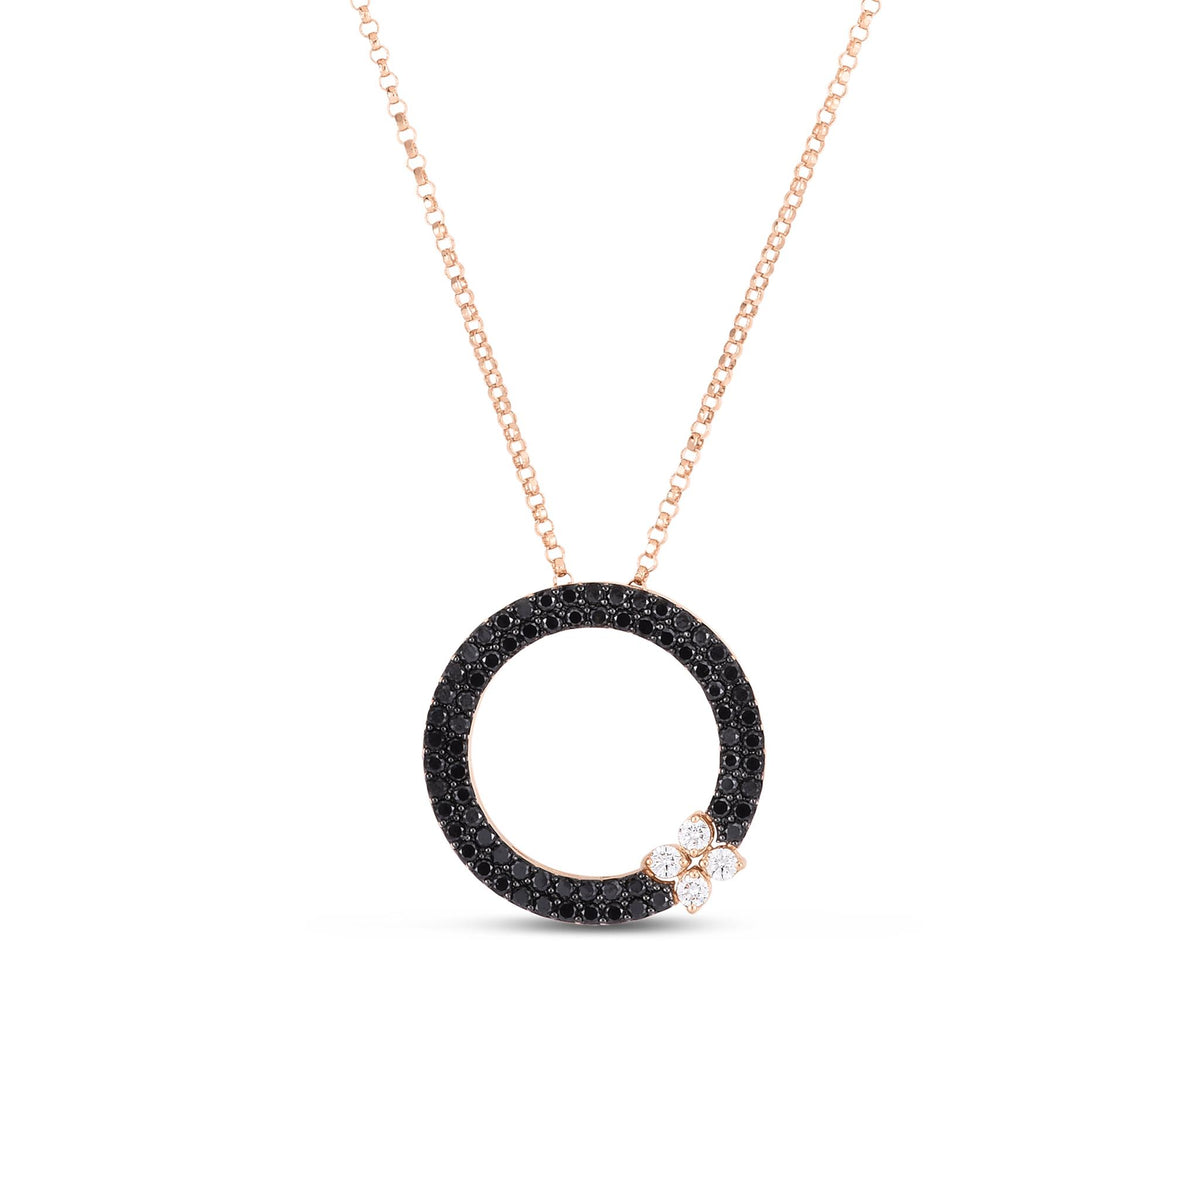 Roberto Coin 18Kt Rose Gold Love In Verona Necklace with Black and White Diamonds